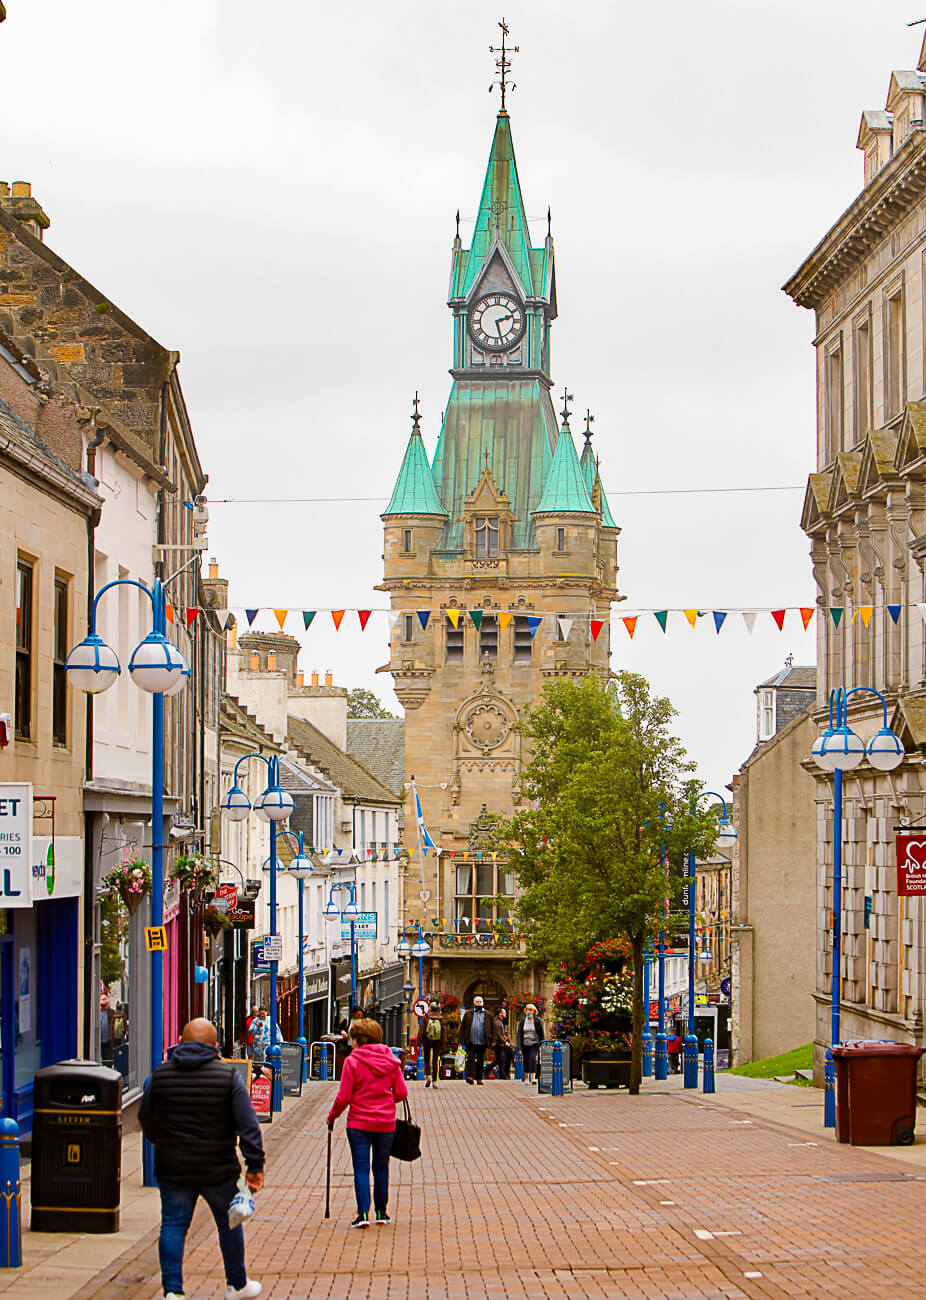 View of Dunfermline High Street, looking down toward the City Chambers